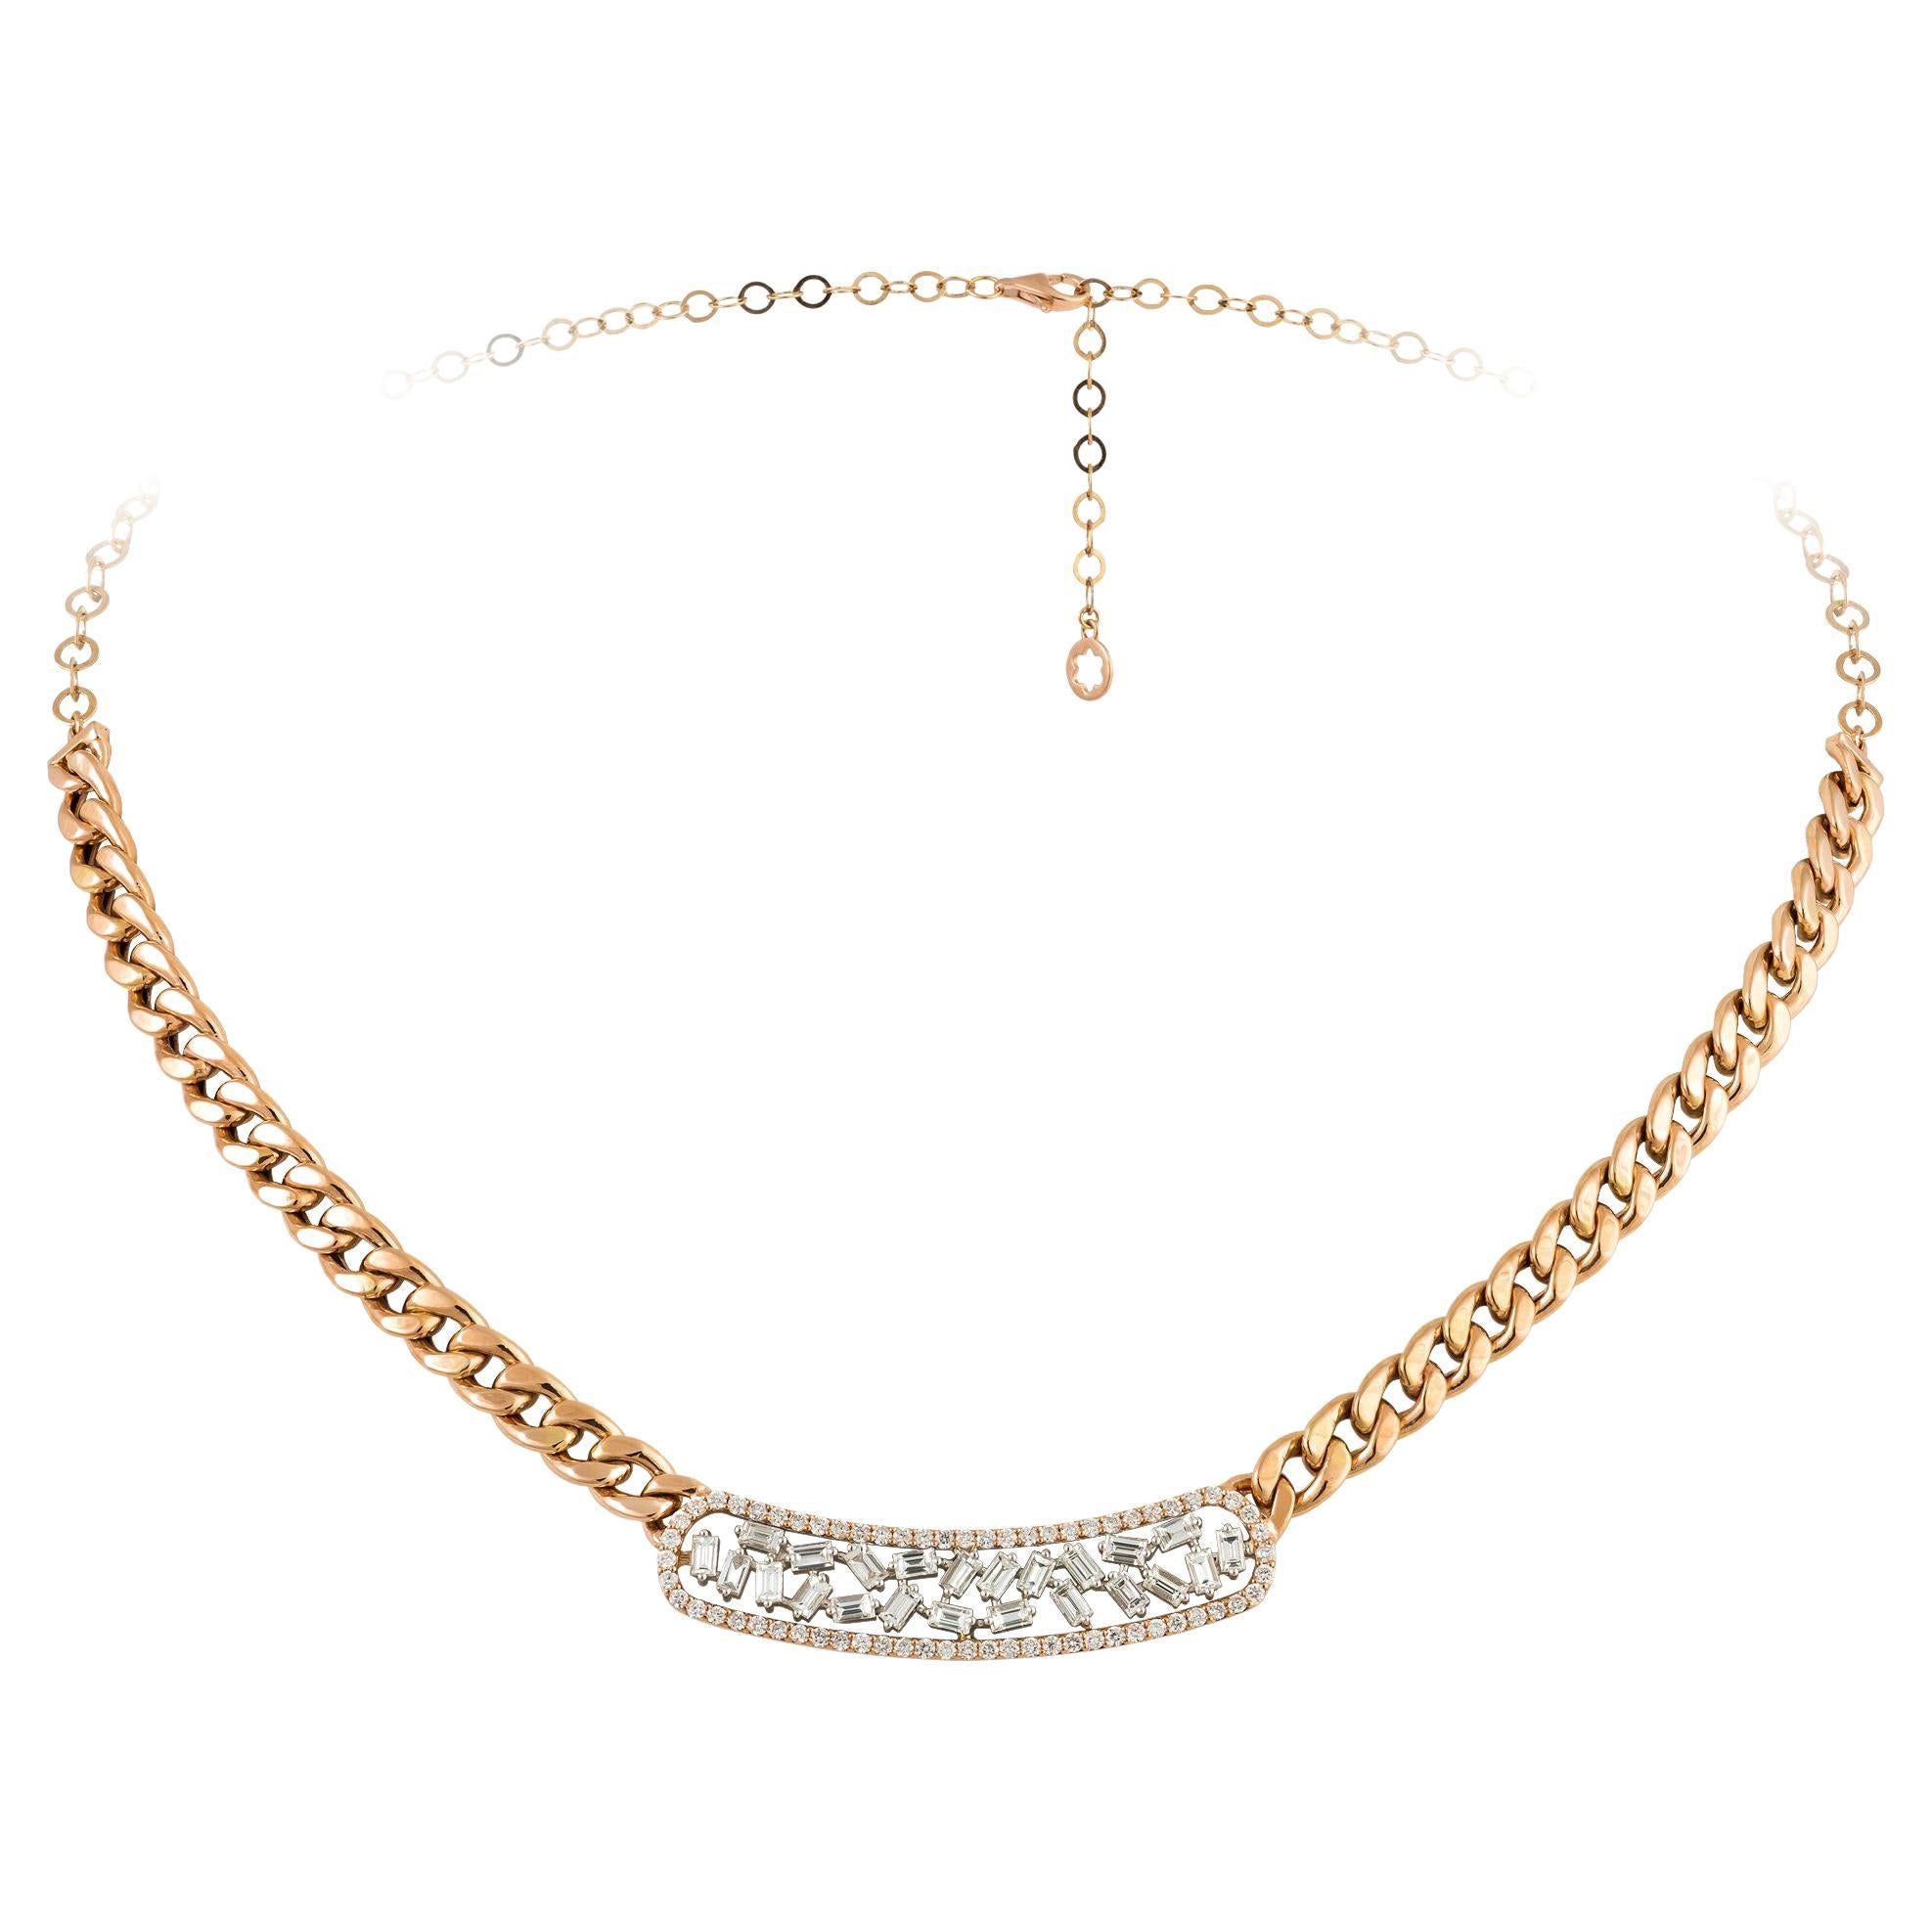 Chain White Pink Gold 18K Necklace Diamond for Her